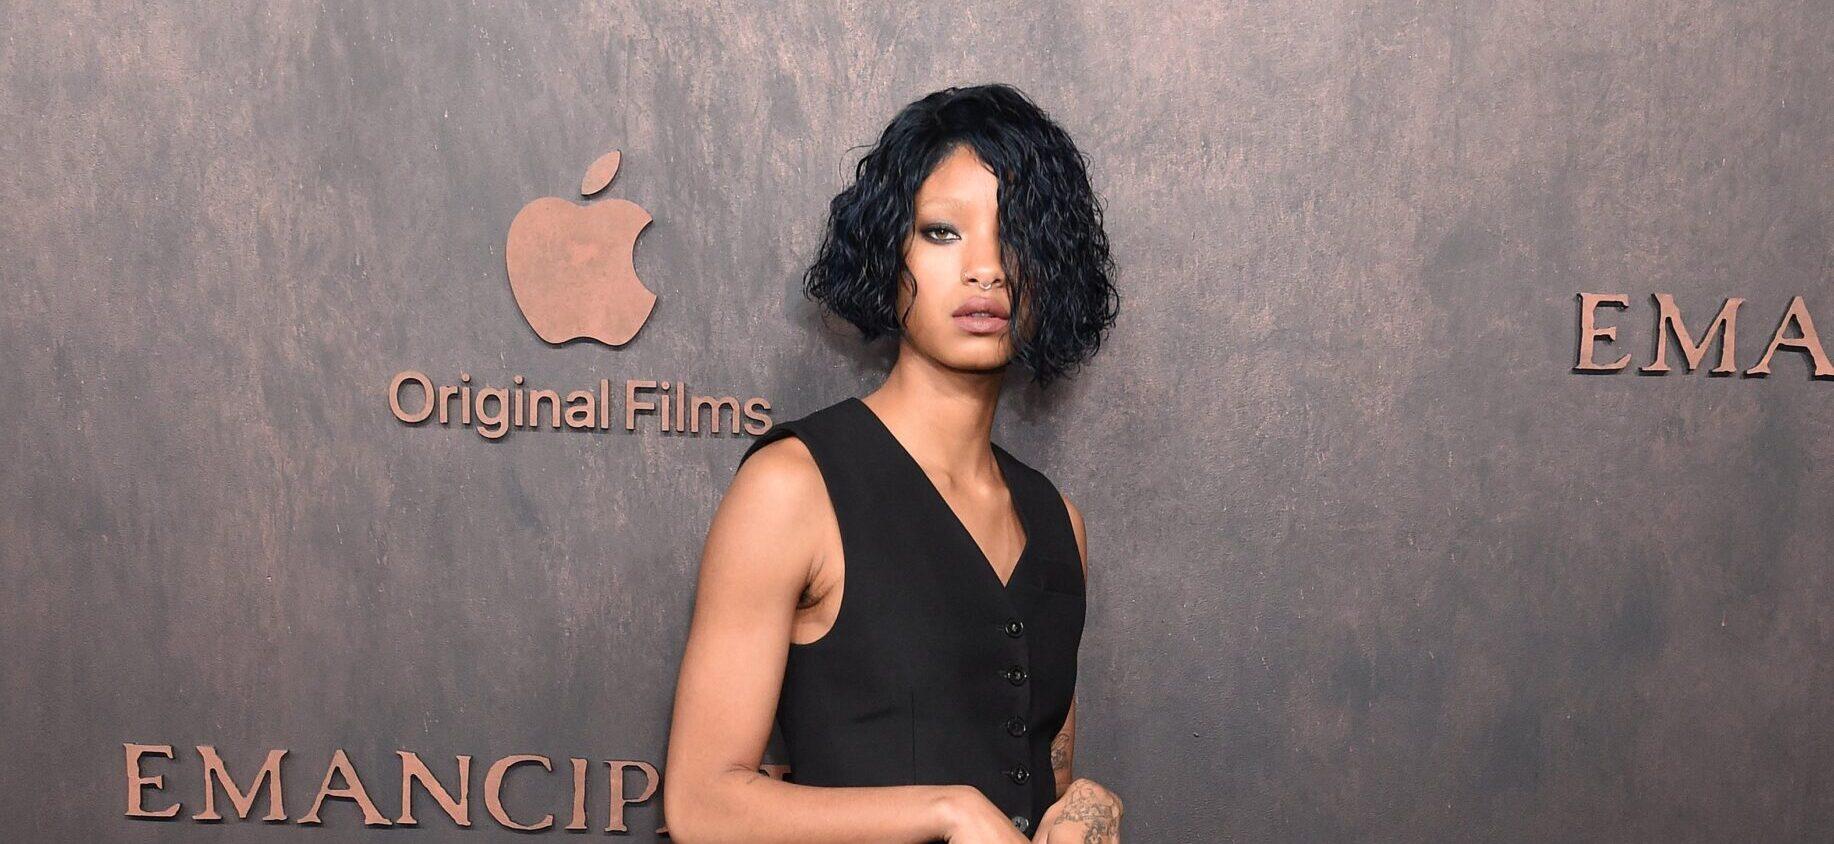 Willow Smith at the Red Carpet Event for the premiere of Apple Original Films Emancipation